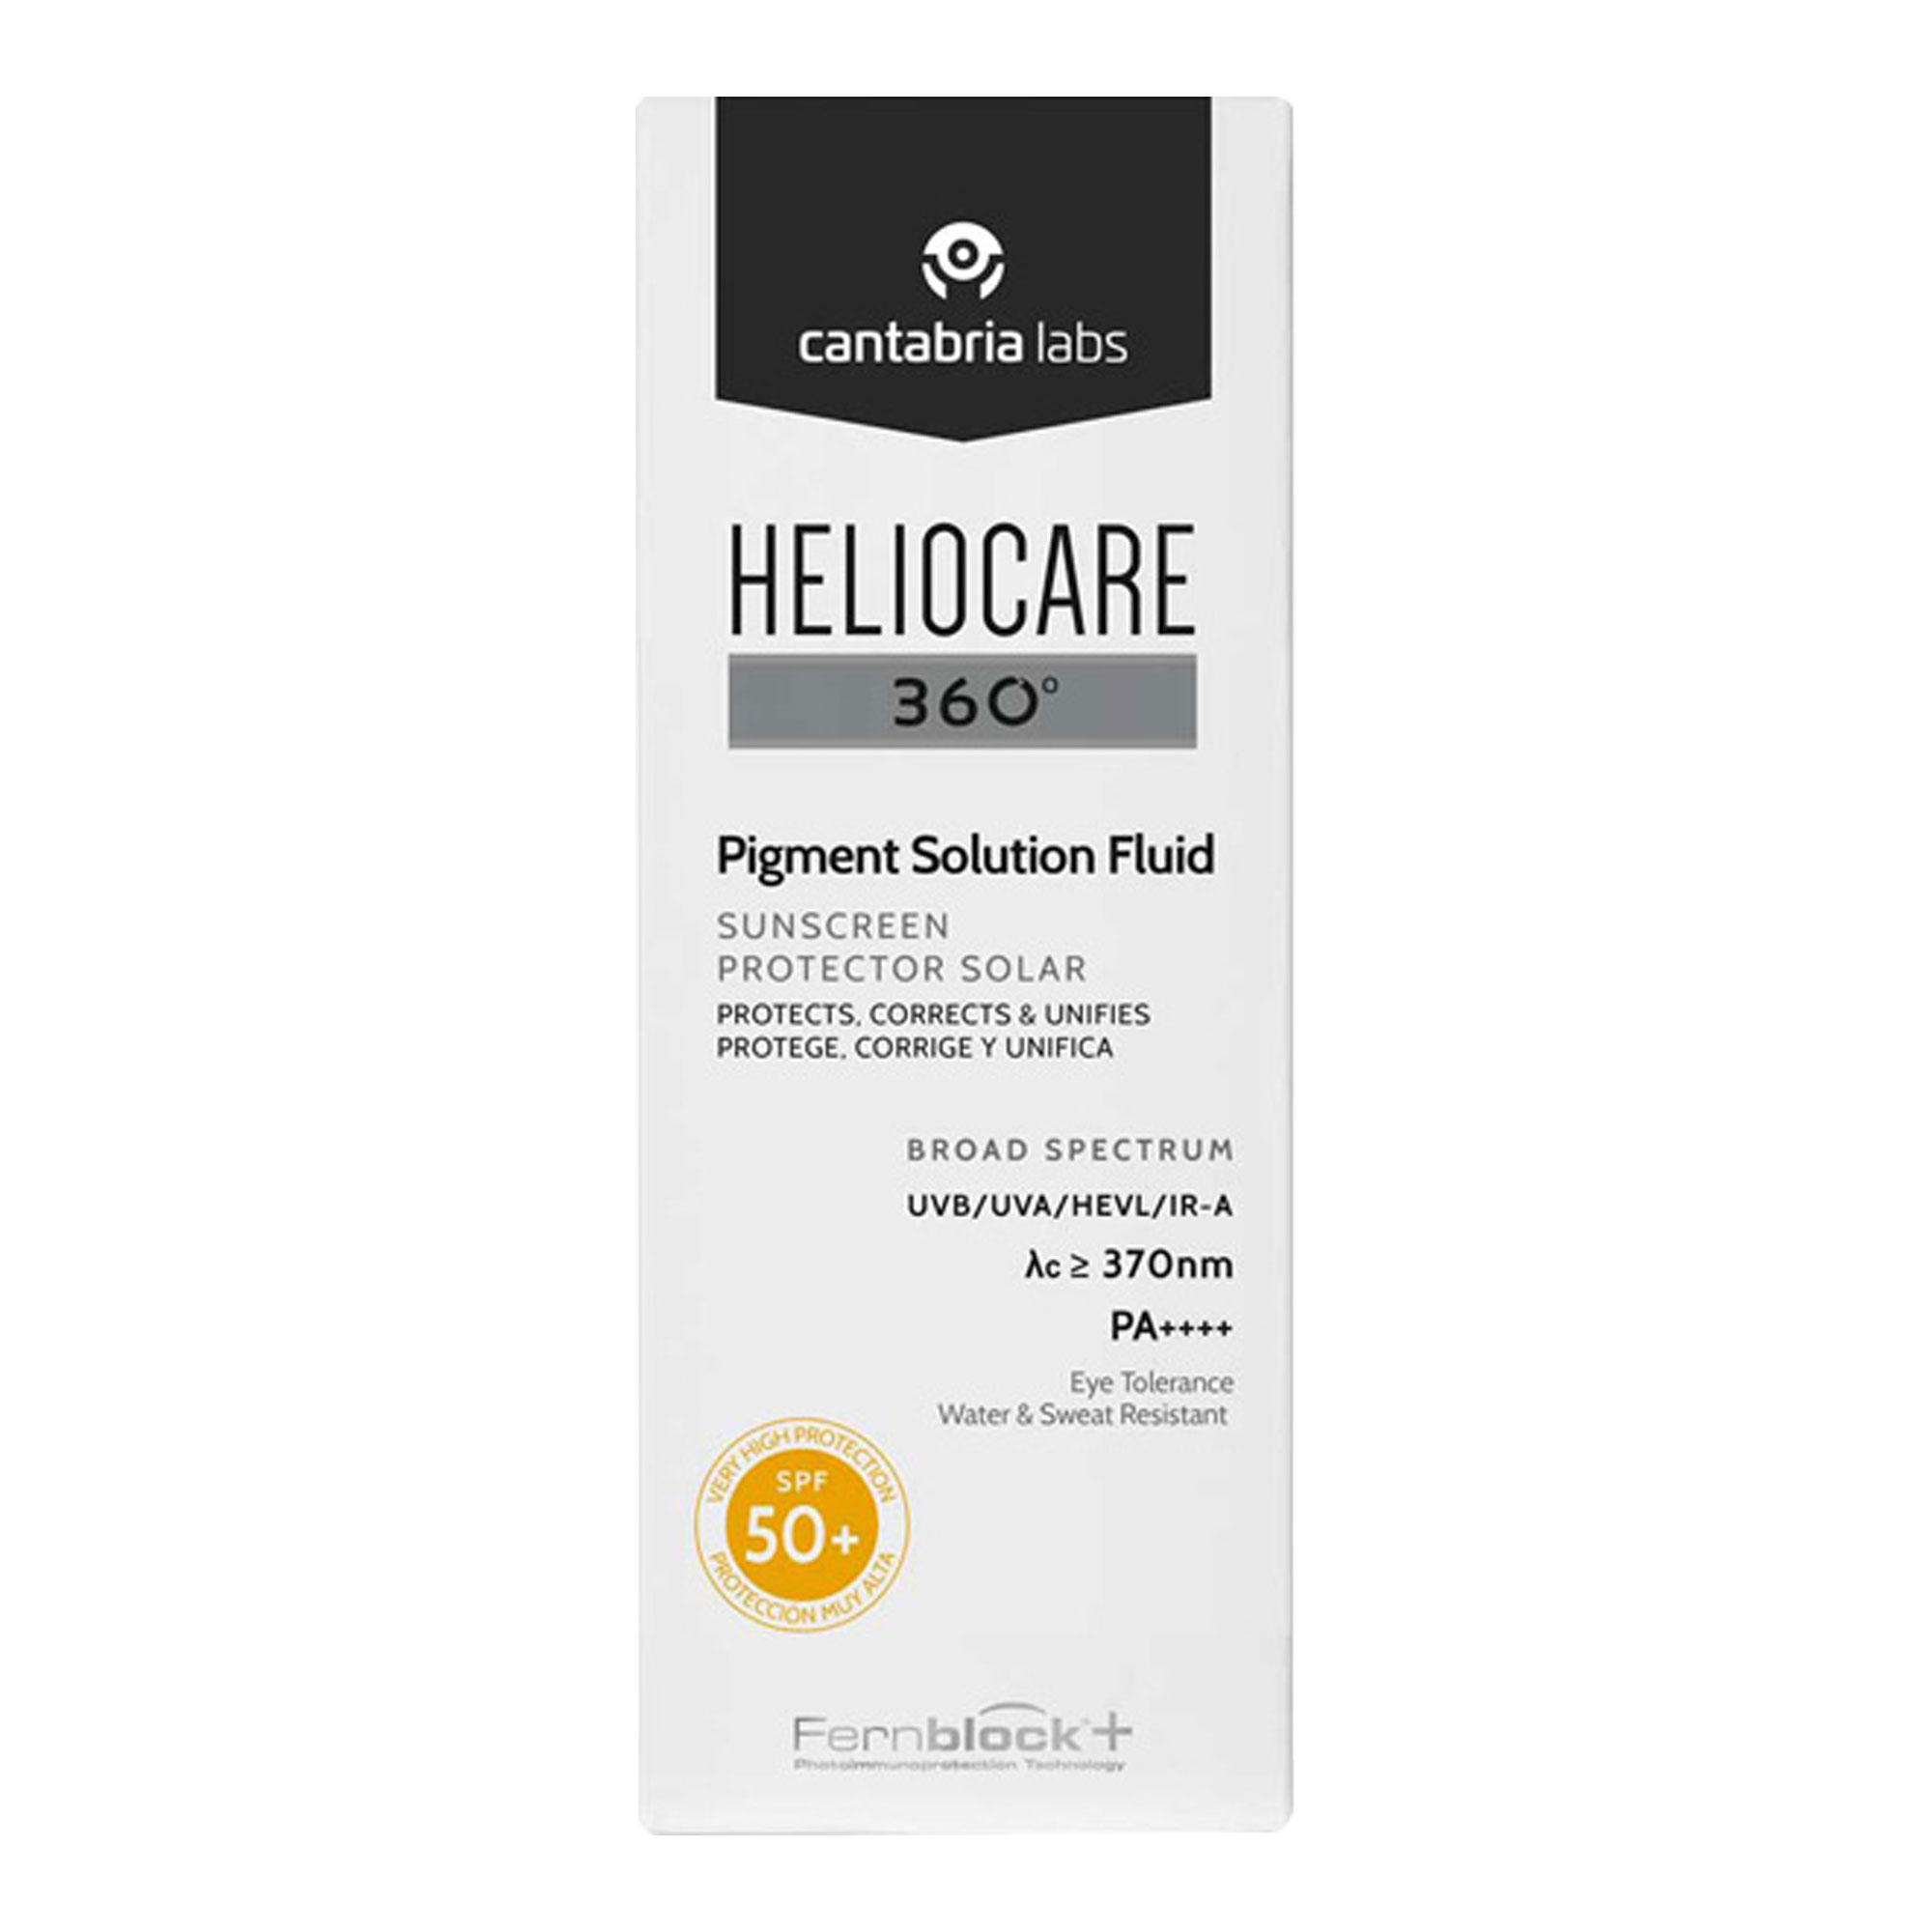 Heliocare 360 Pigment Solution Fluid LSF 50+